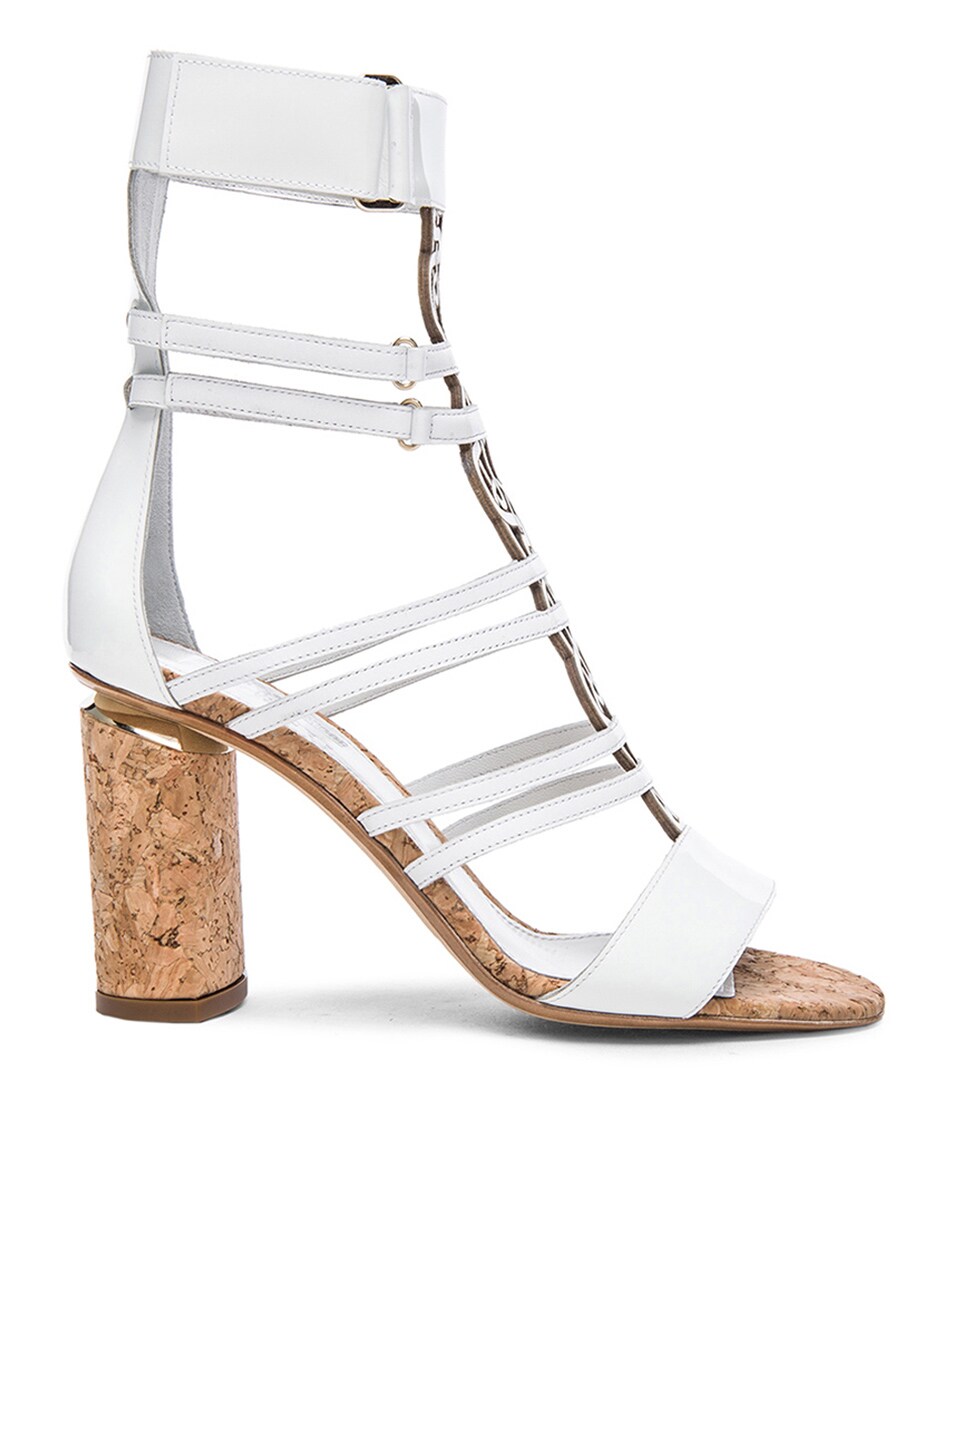 Image 1 of Nicholas Kirkwood x Peter Pilotto Patent Leather Heels in White Laser Cut